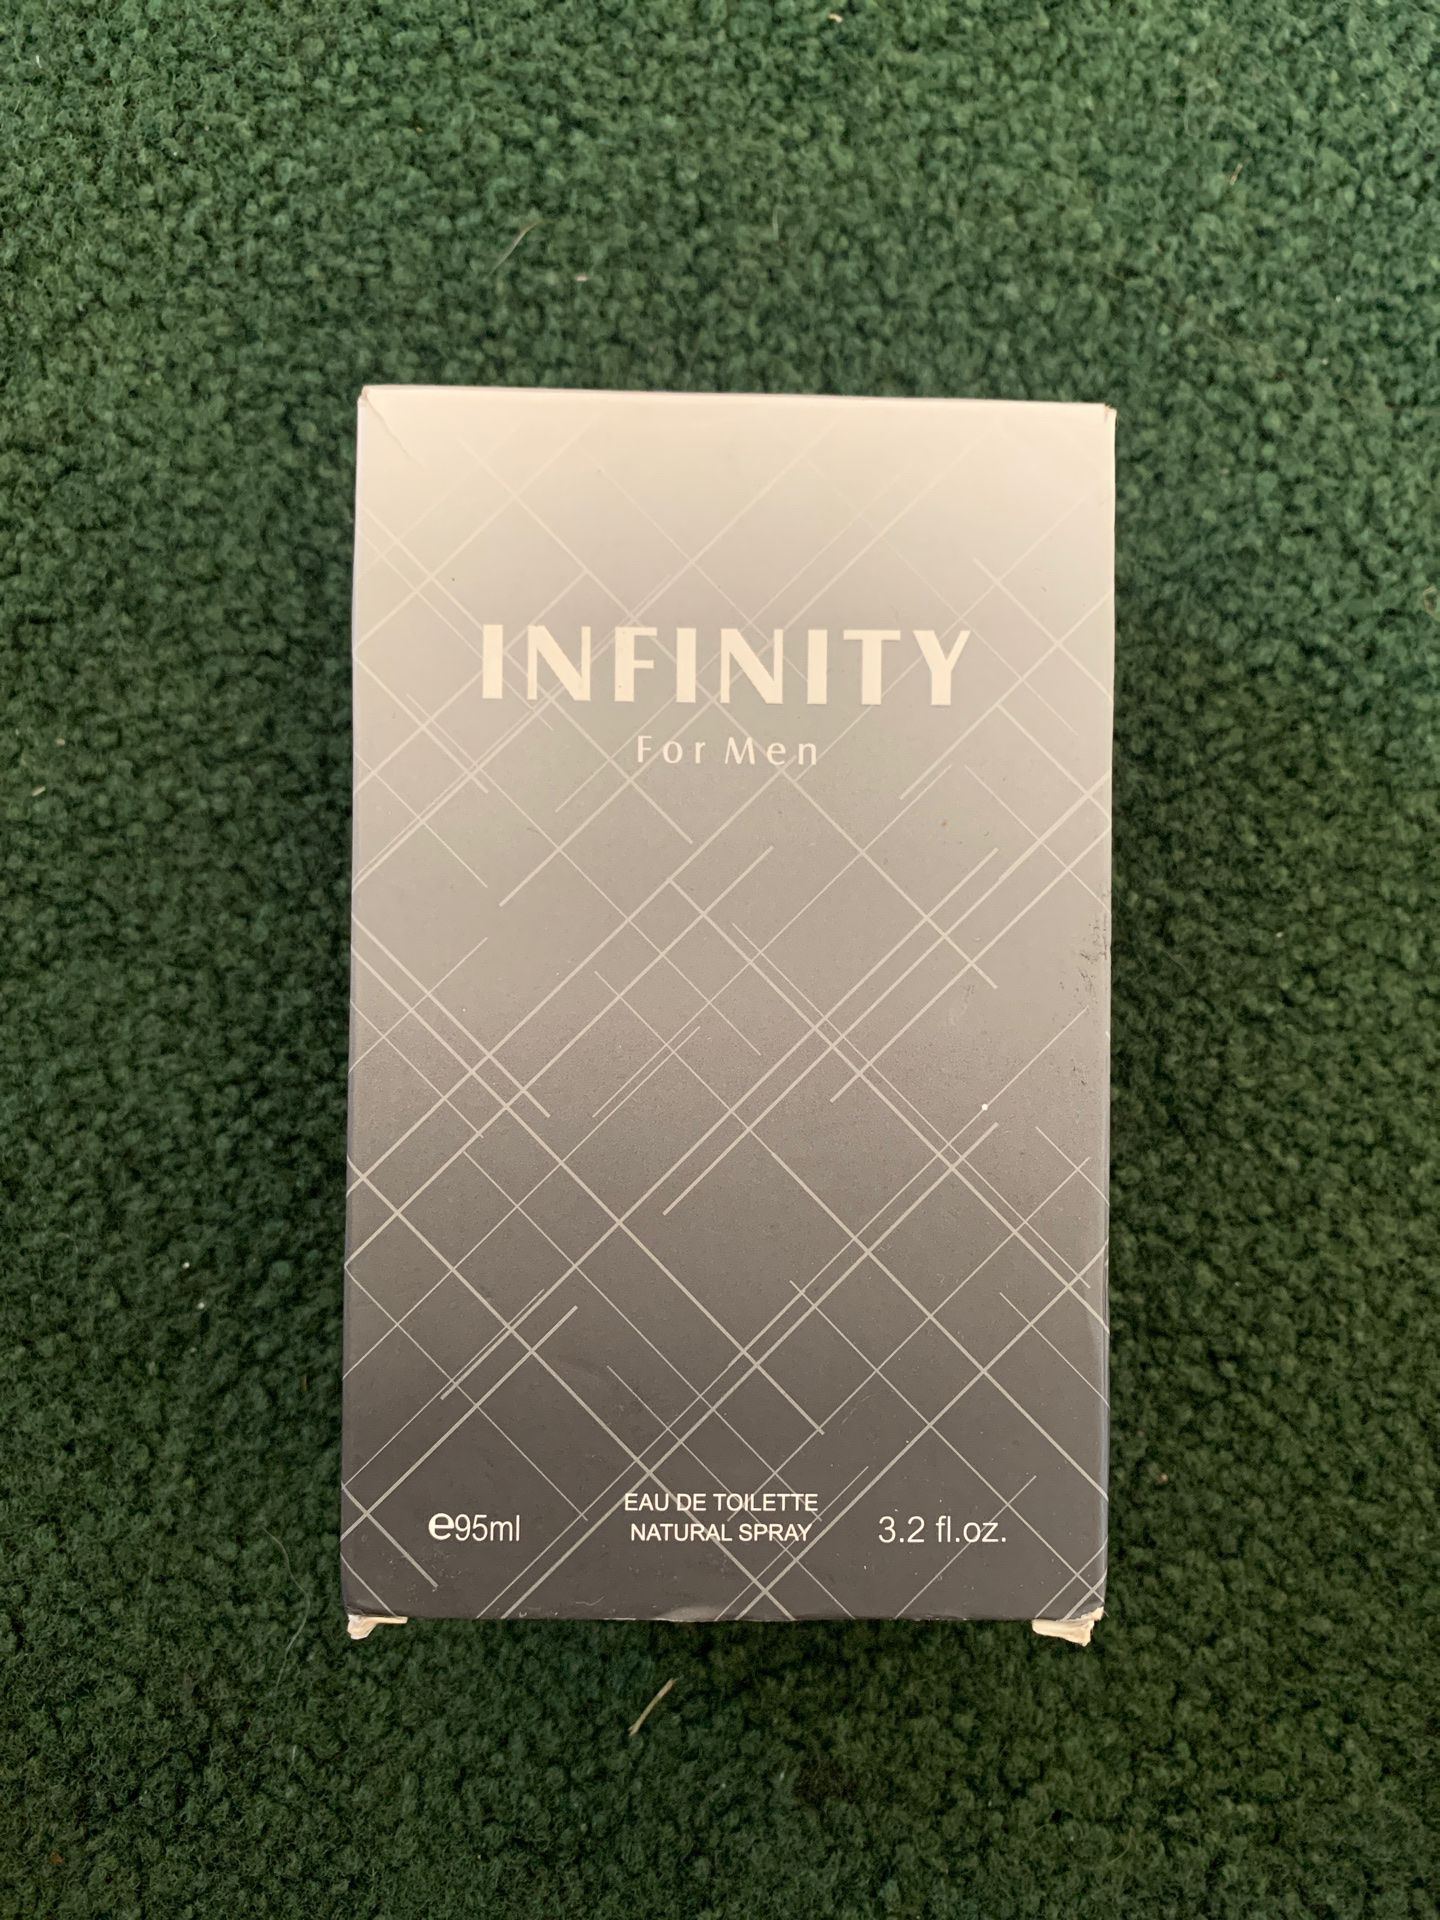 Infinity cologne